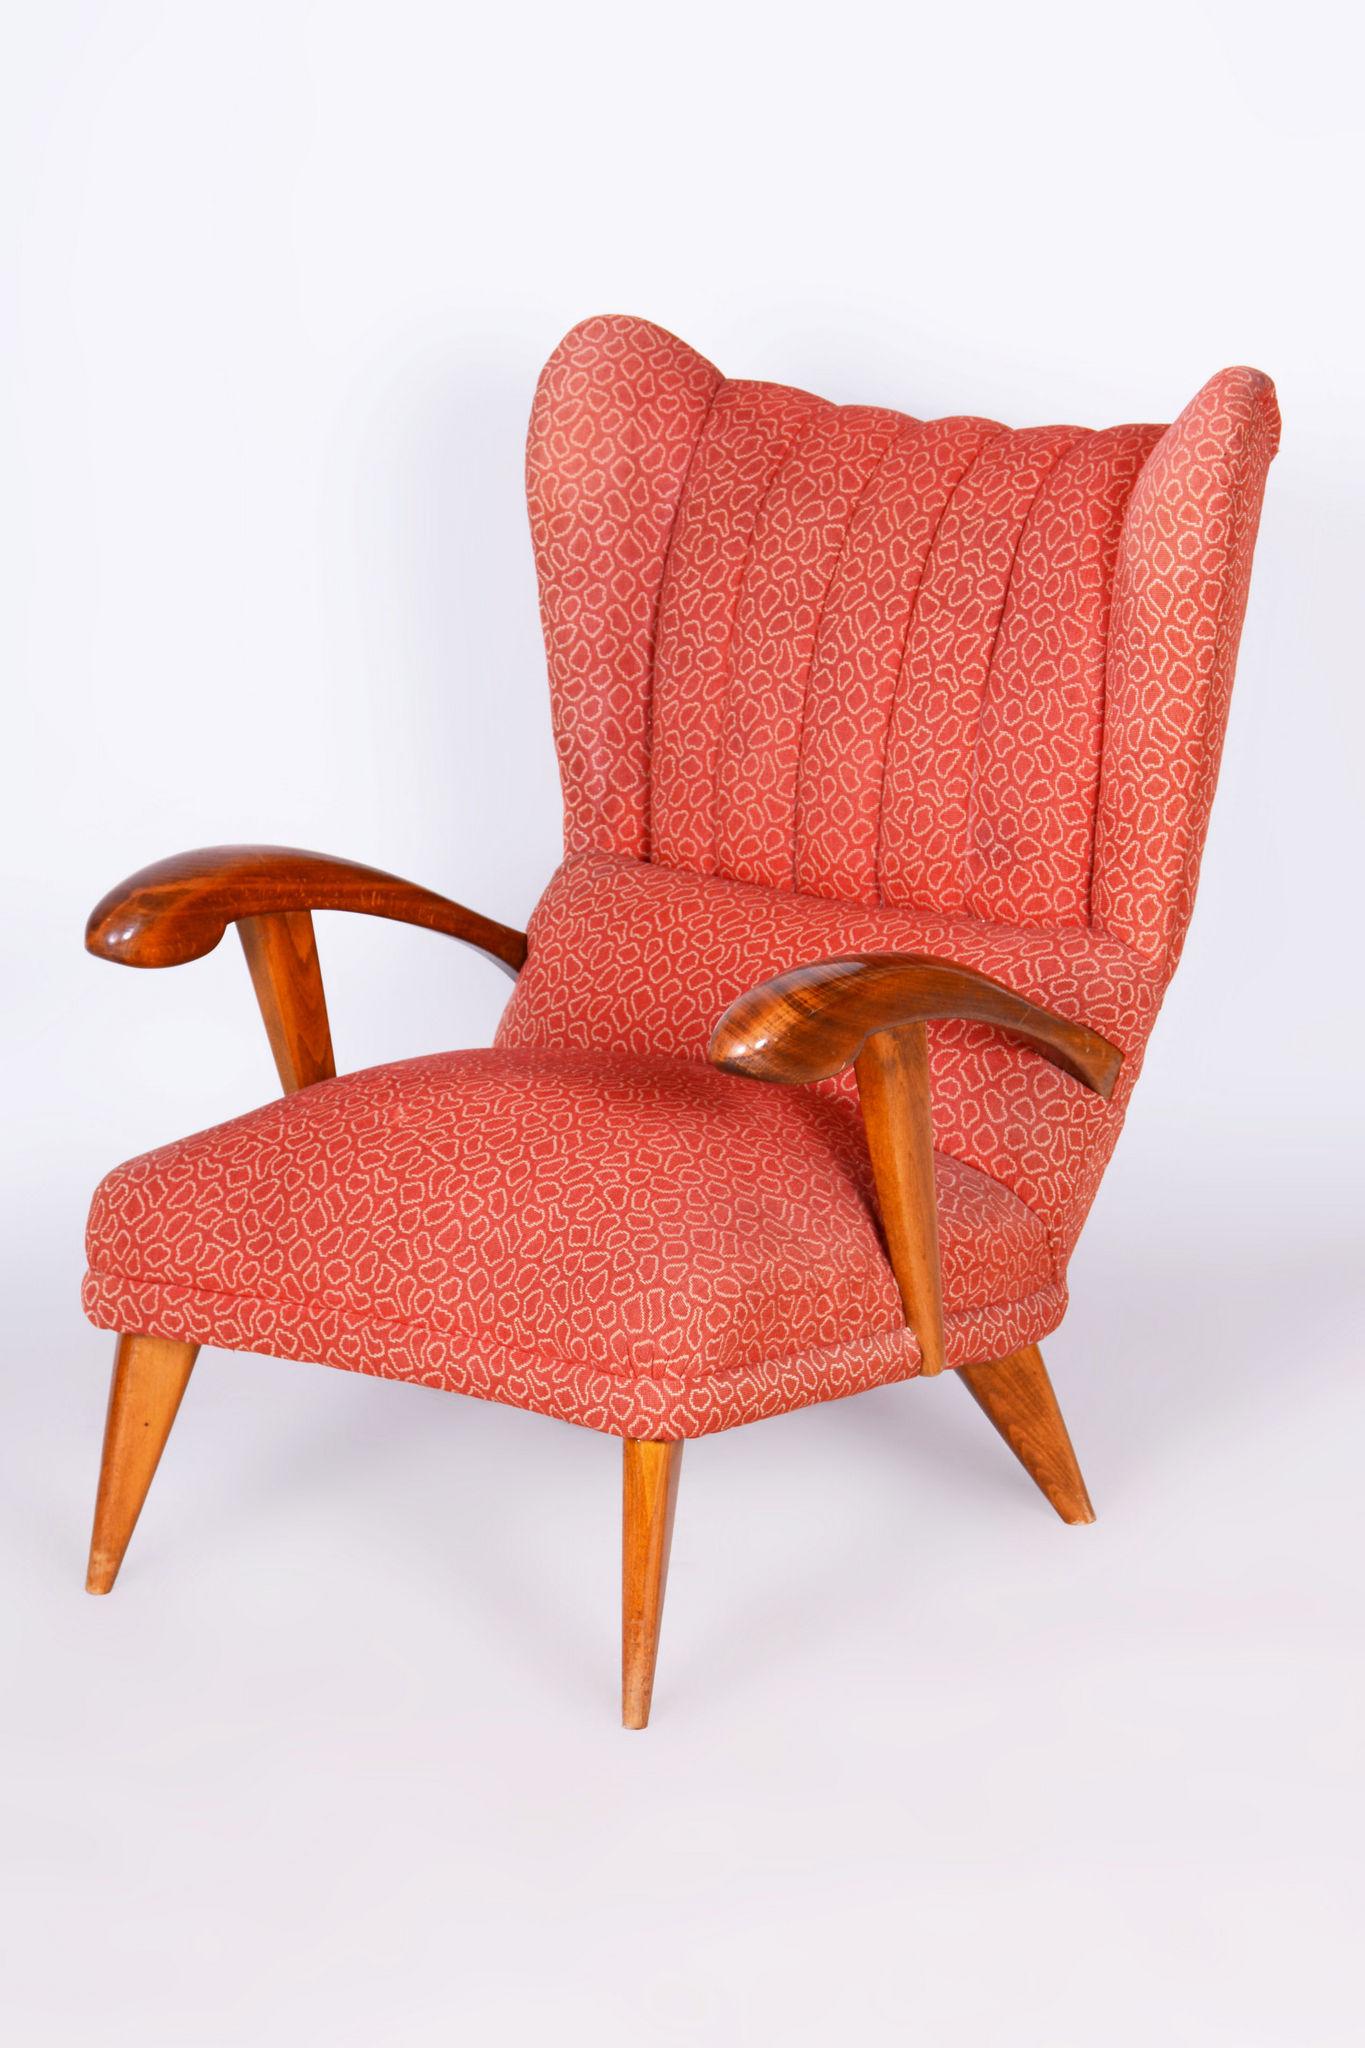 The very comfortable and popular armchair was designed by the architect Jan Vaněk in the early period of his work.
The traditional spring upholstery is original, well-preserved and unseated. The cover fabric designed by Professor Antonín Kybal is